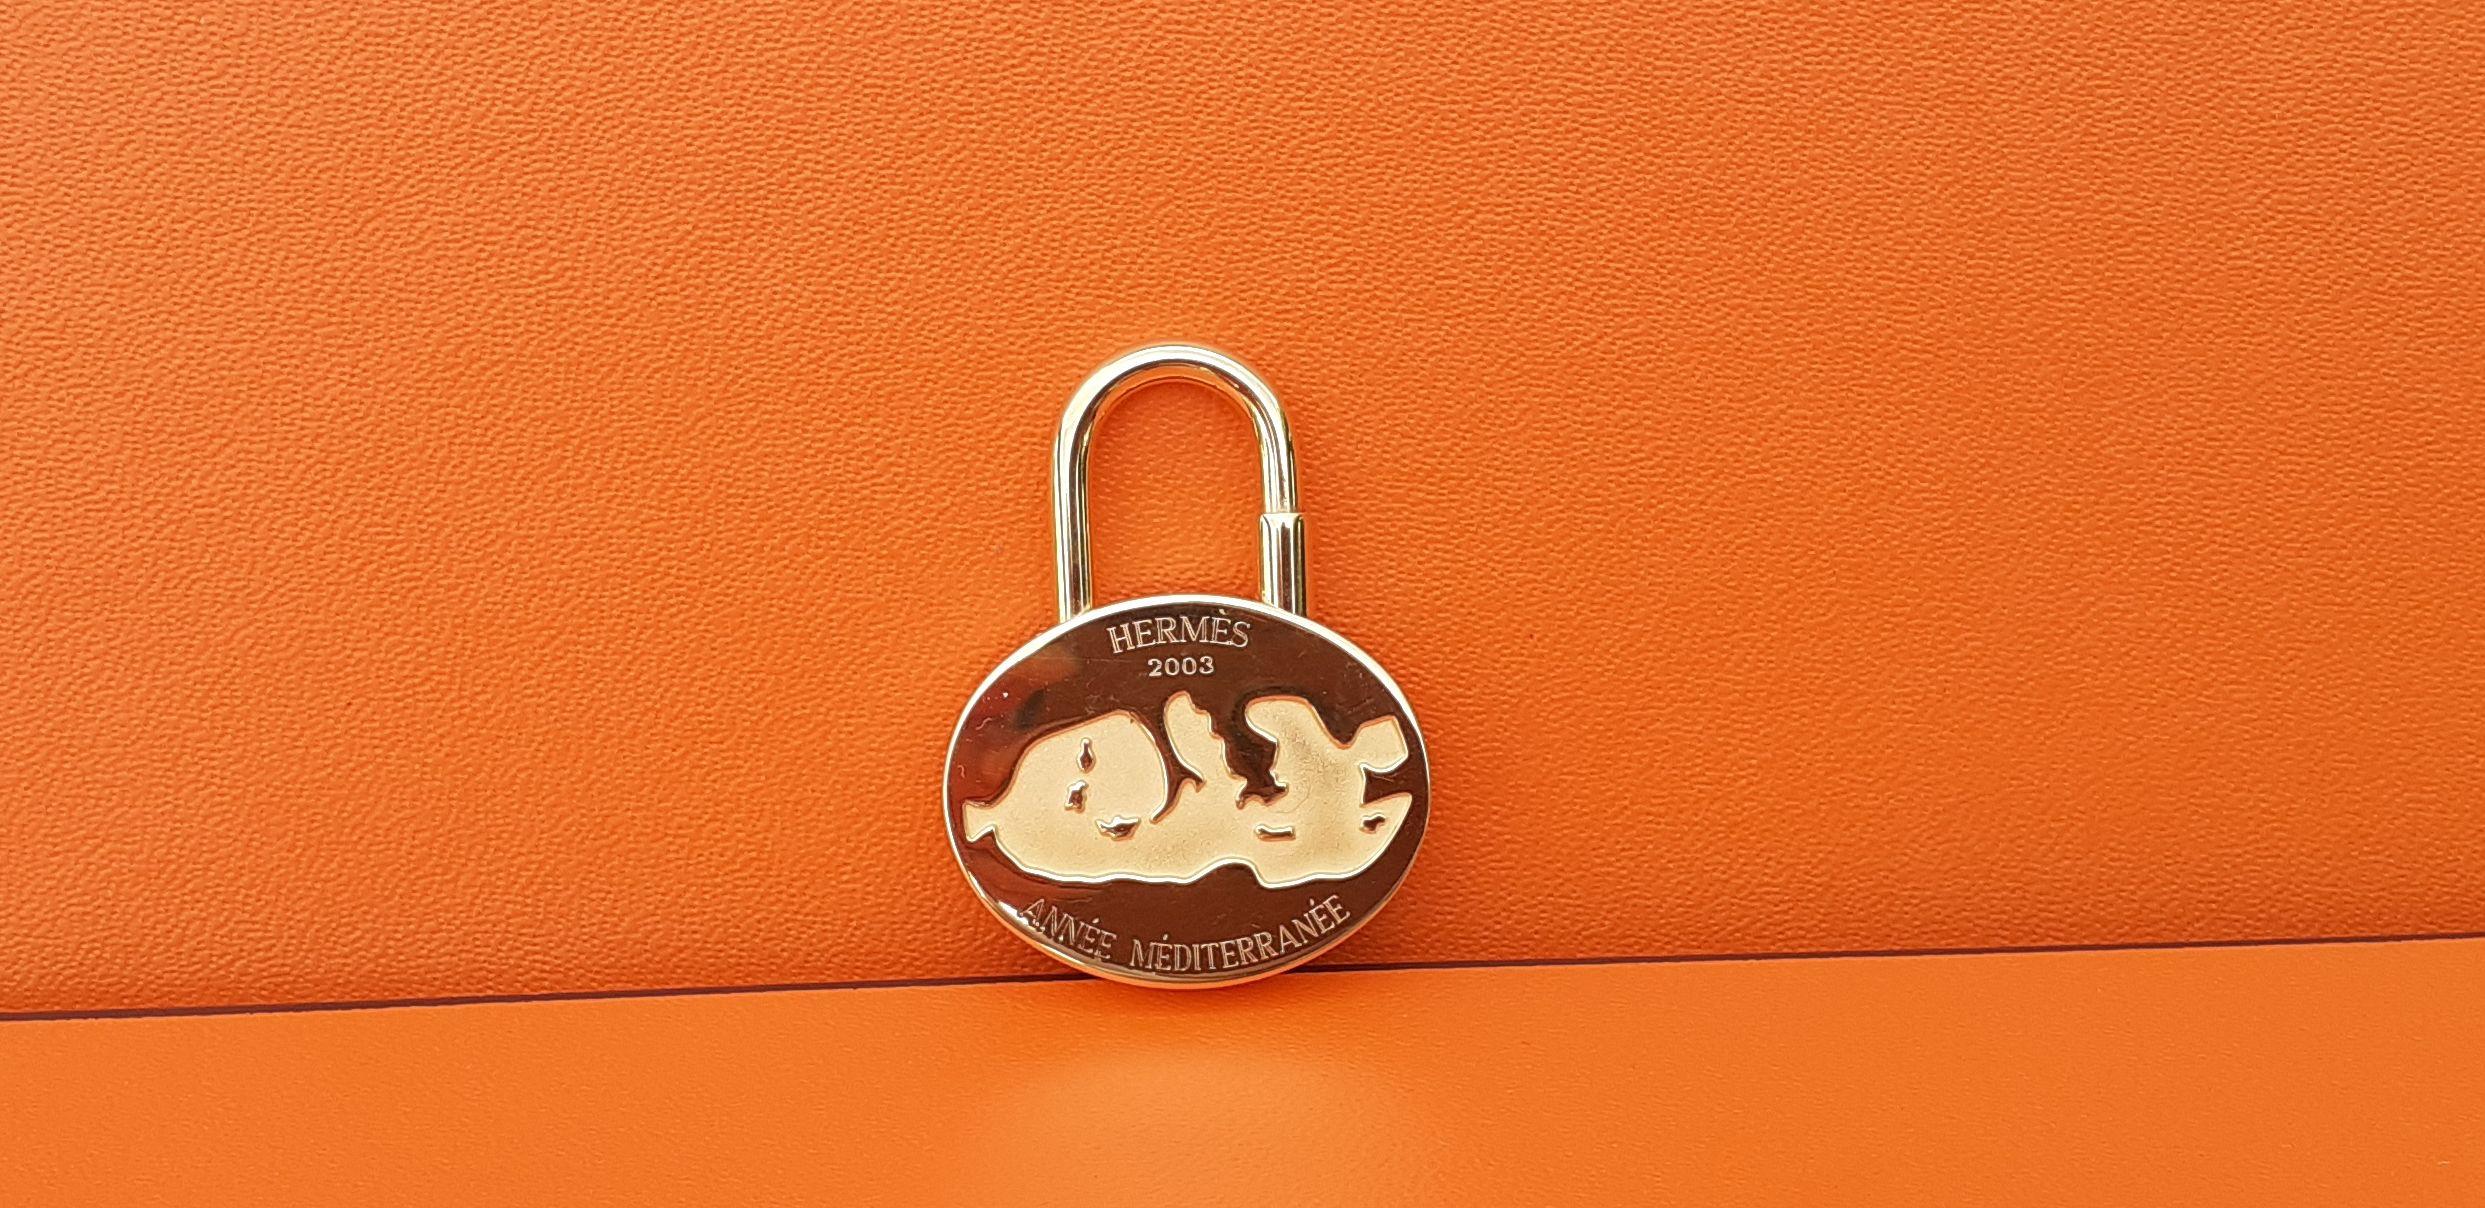 Rare opportunity to get this authentic Hermès Padlock

Collector item, limited Edition 